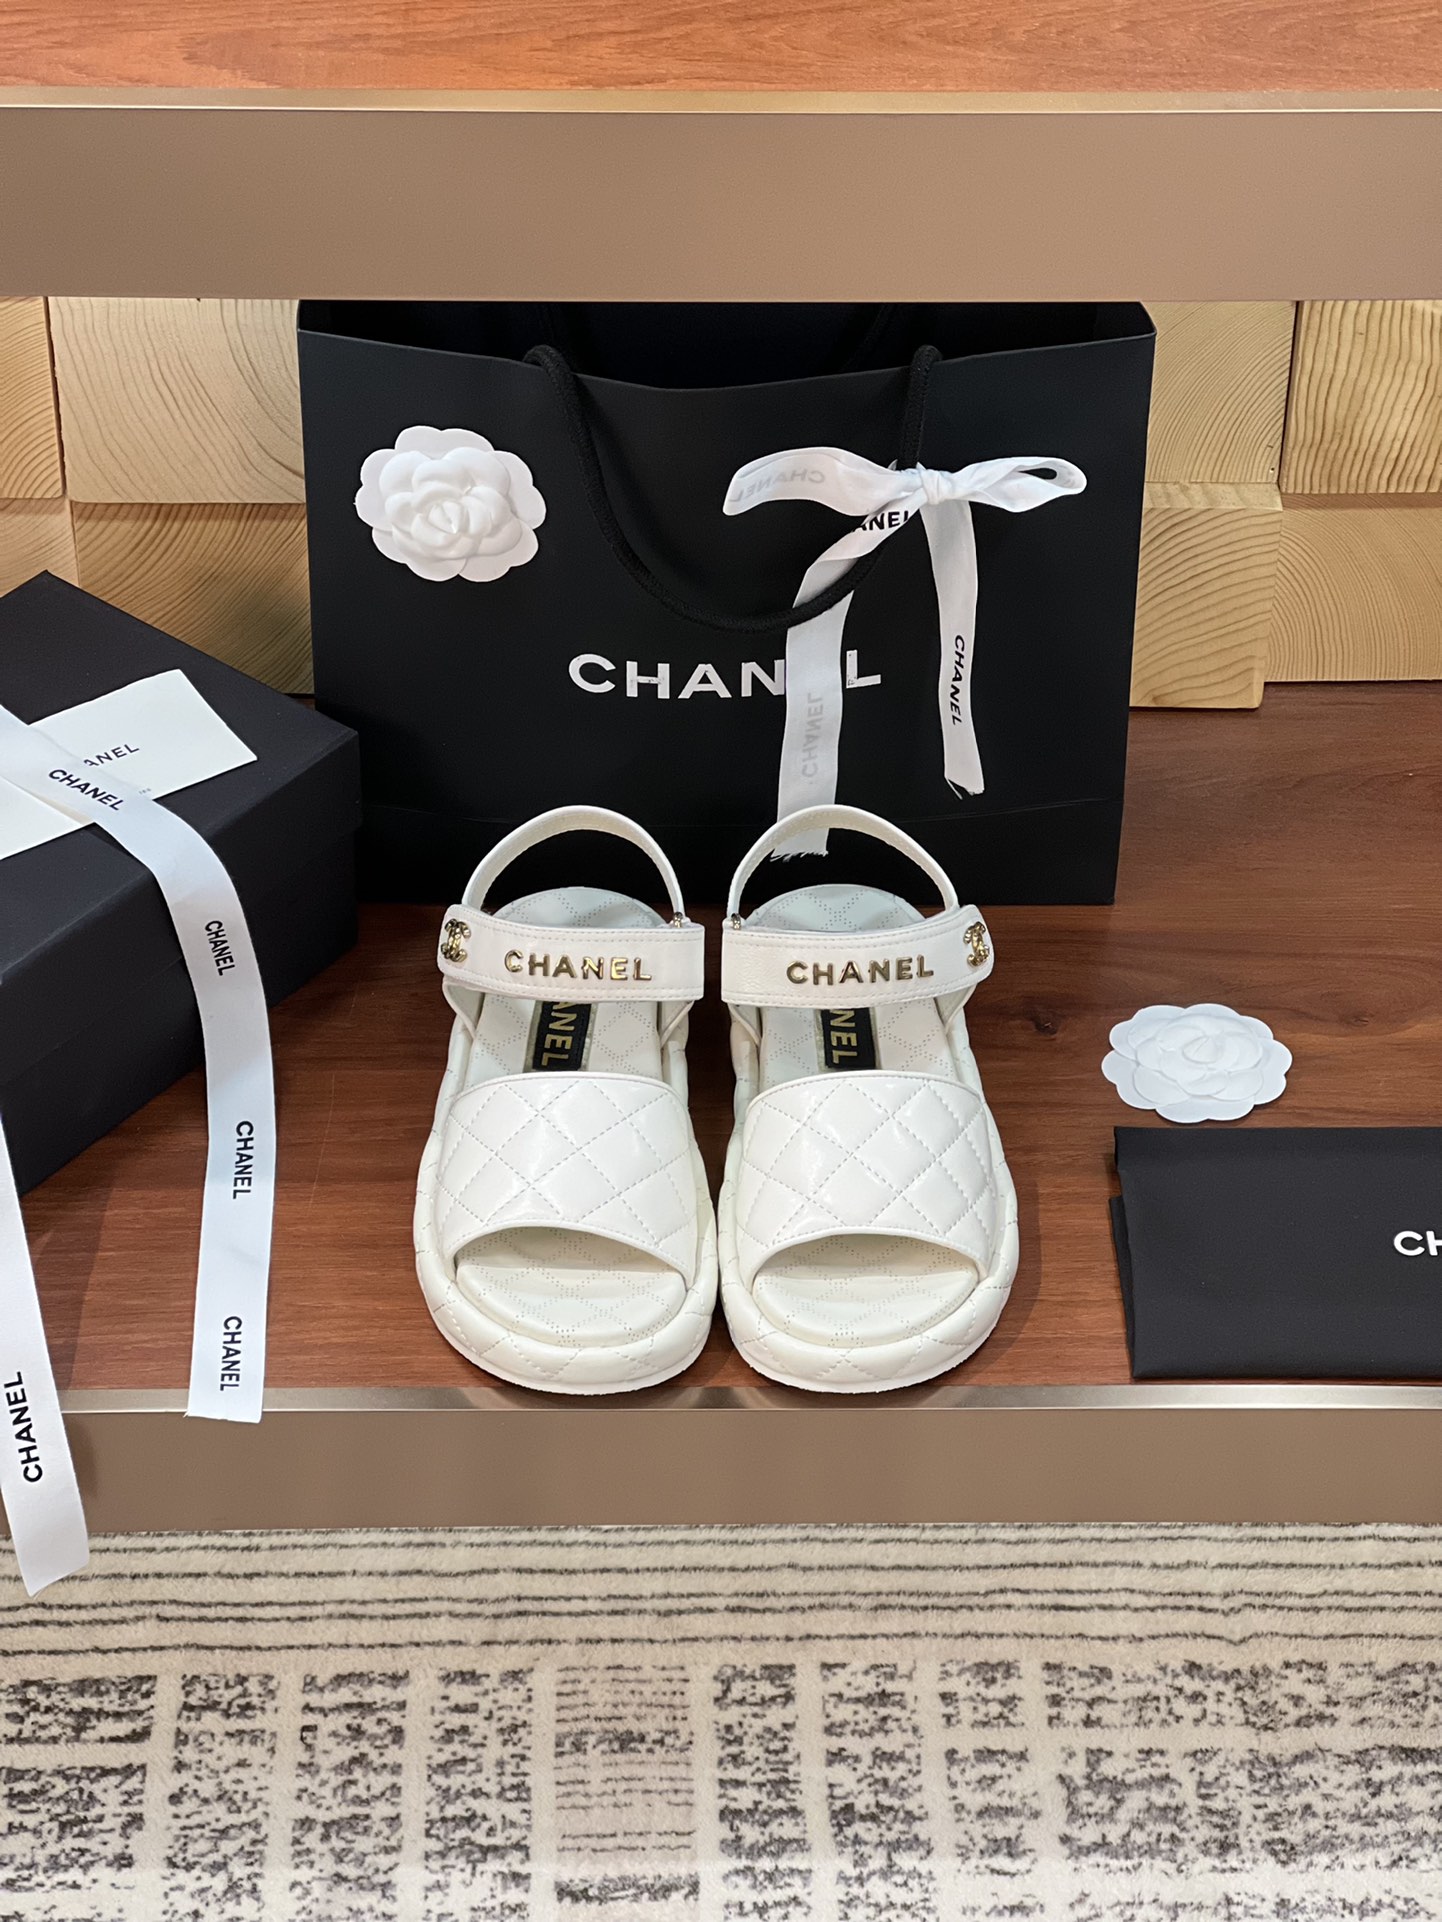 Chanel Shoes Sandals Lambskin Rubber Sheepskin Spring/Summer Collection